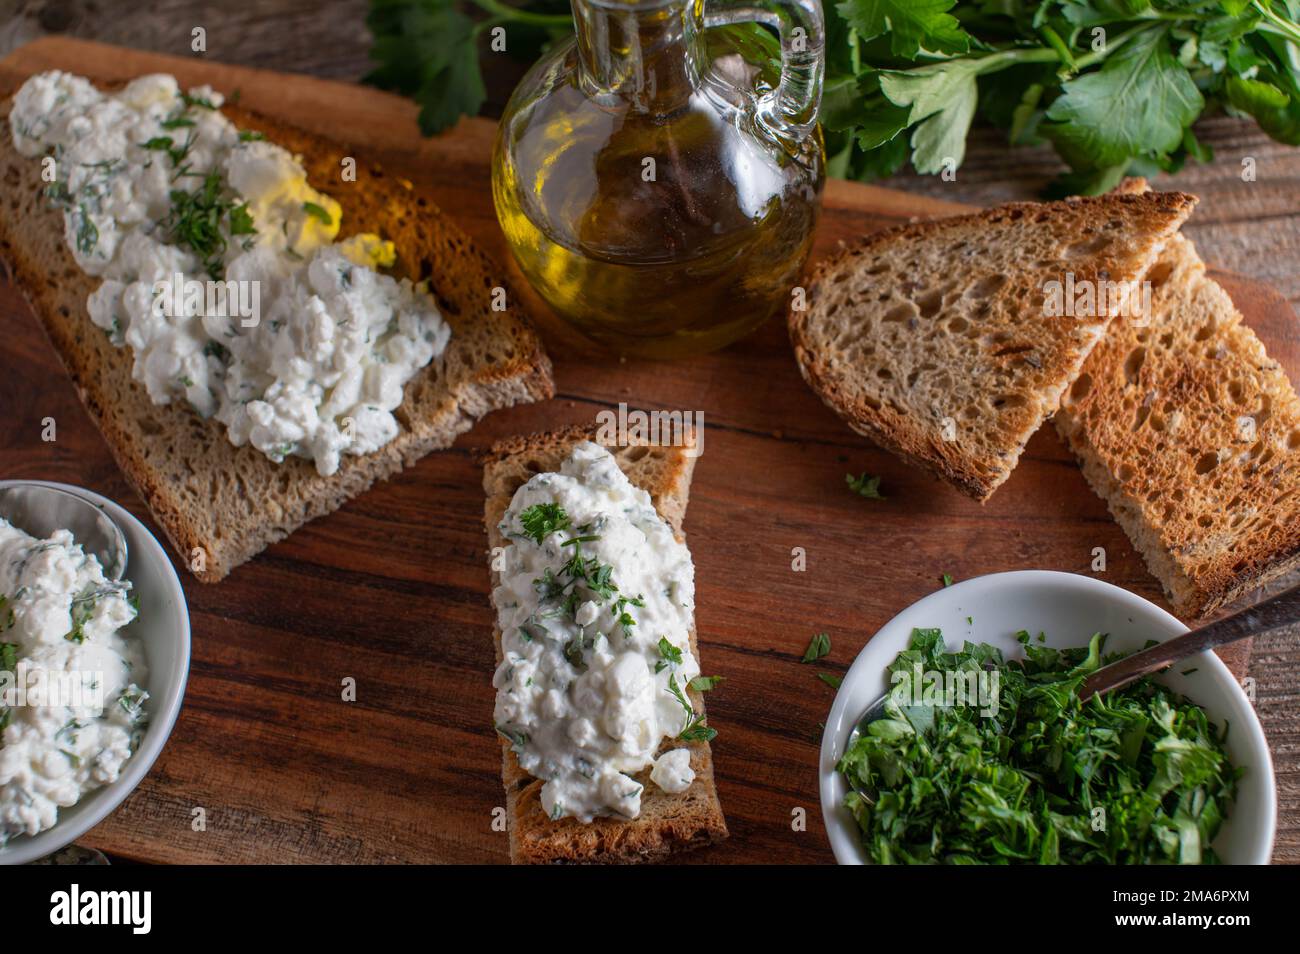 Roasted or toasted Rye Bread with cottage cheese and herbs on wooden table. Stock Photo